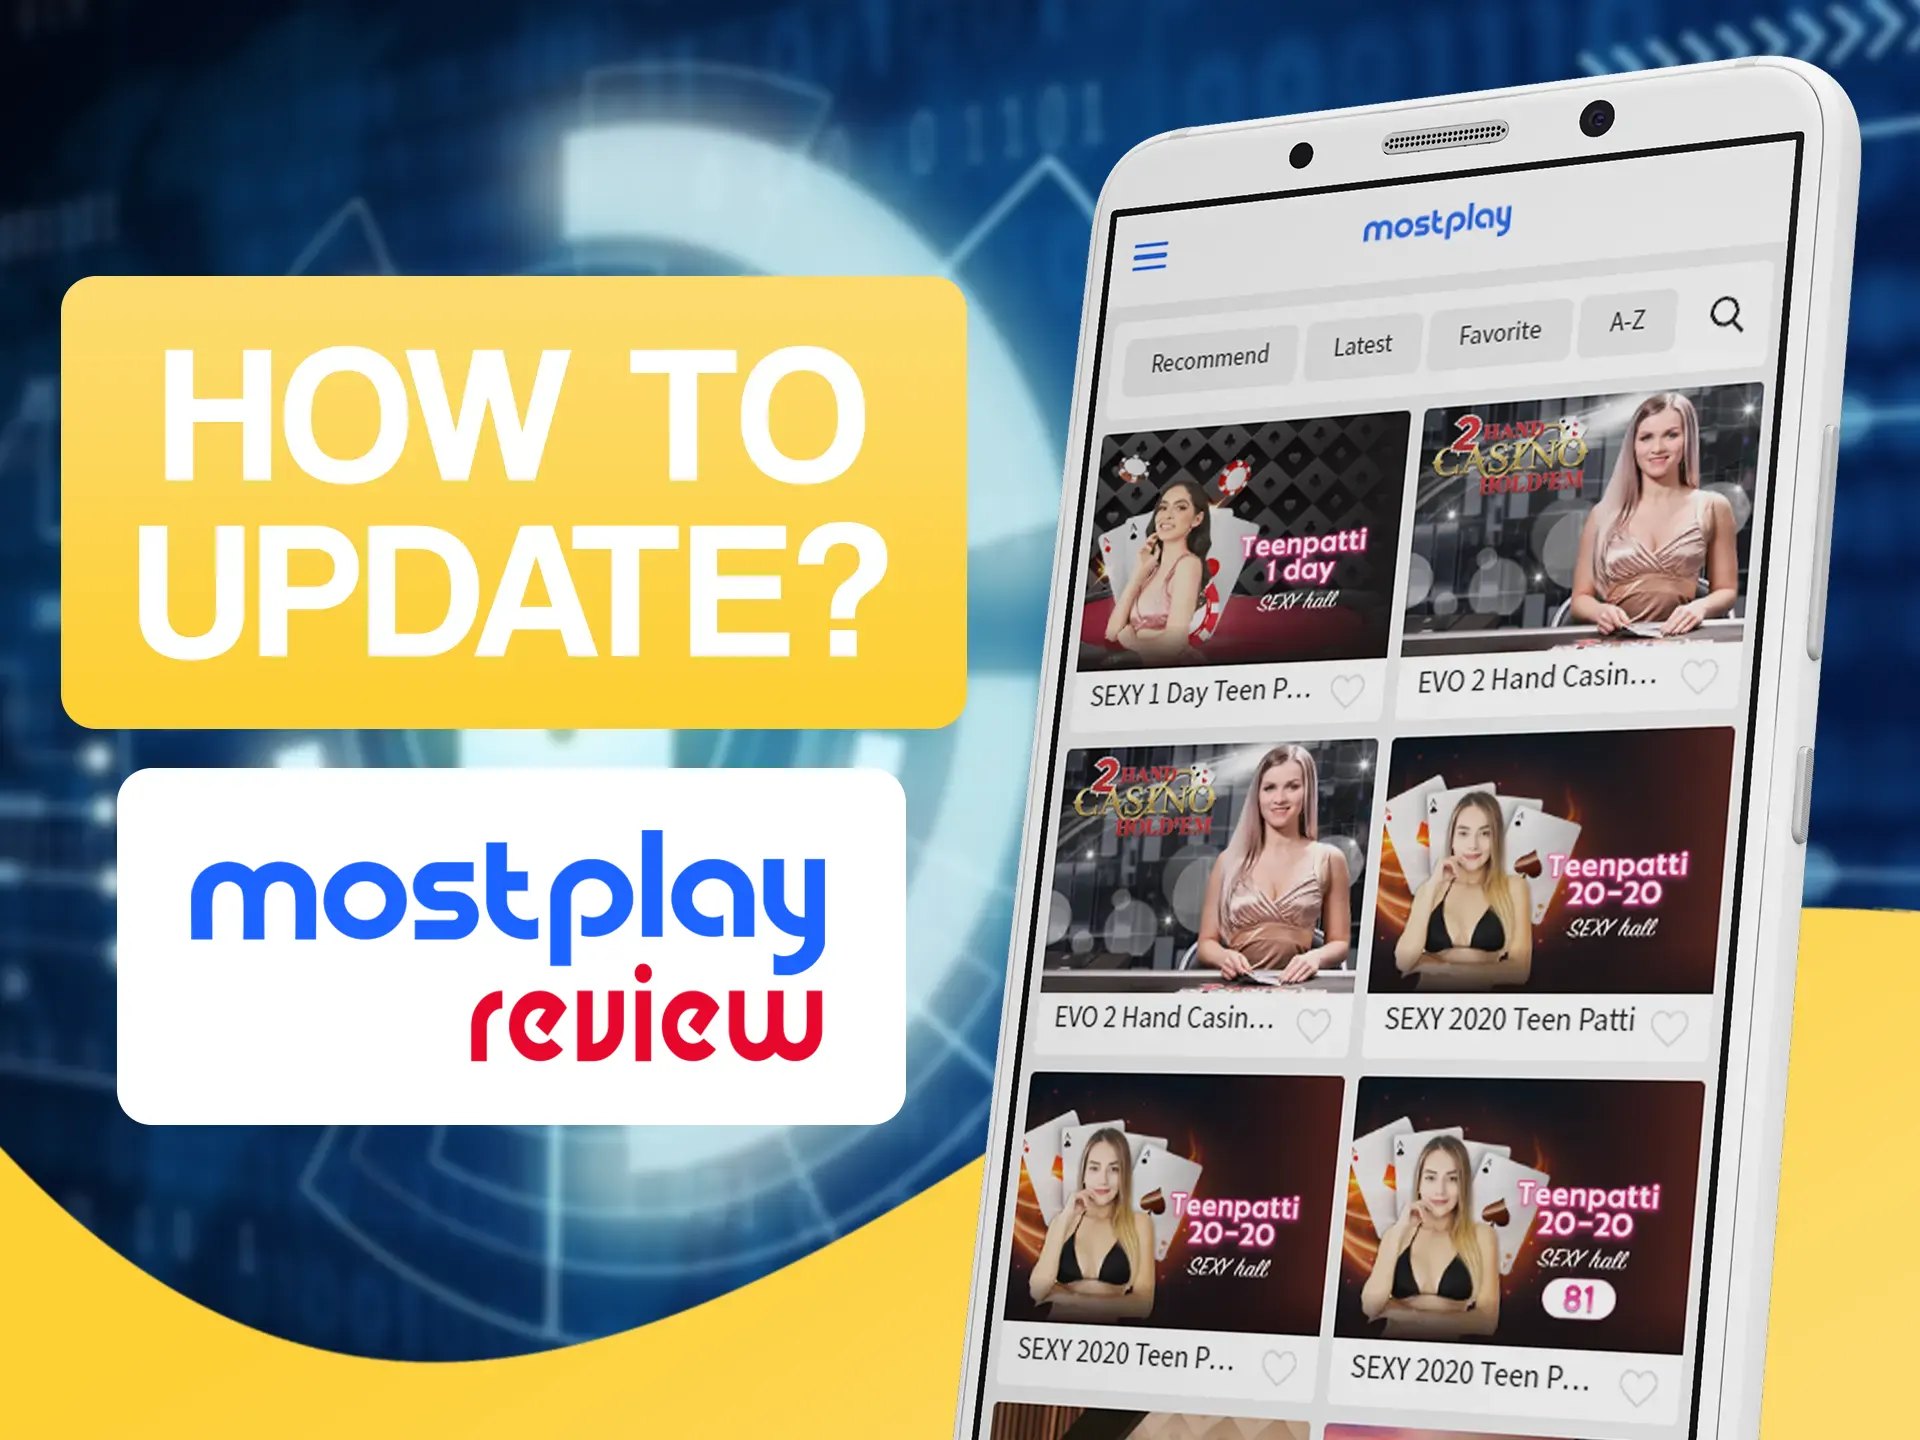 Mostplay app updates automatically after logging in.